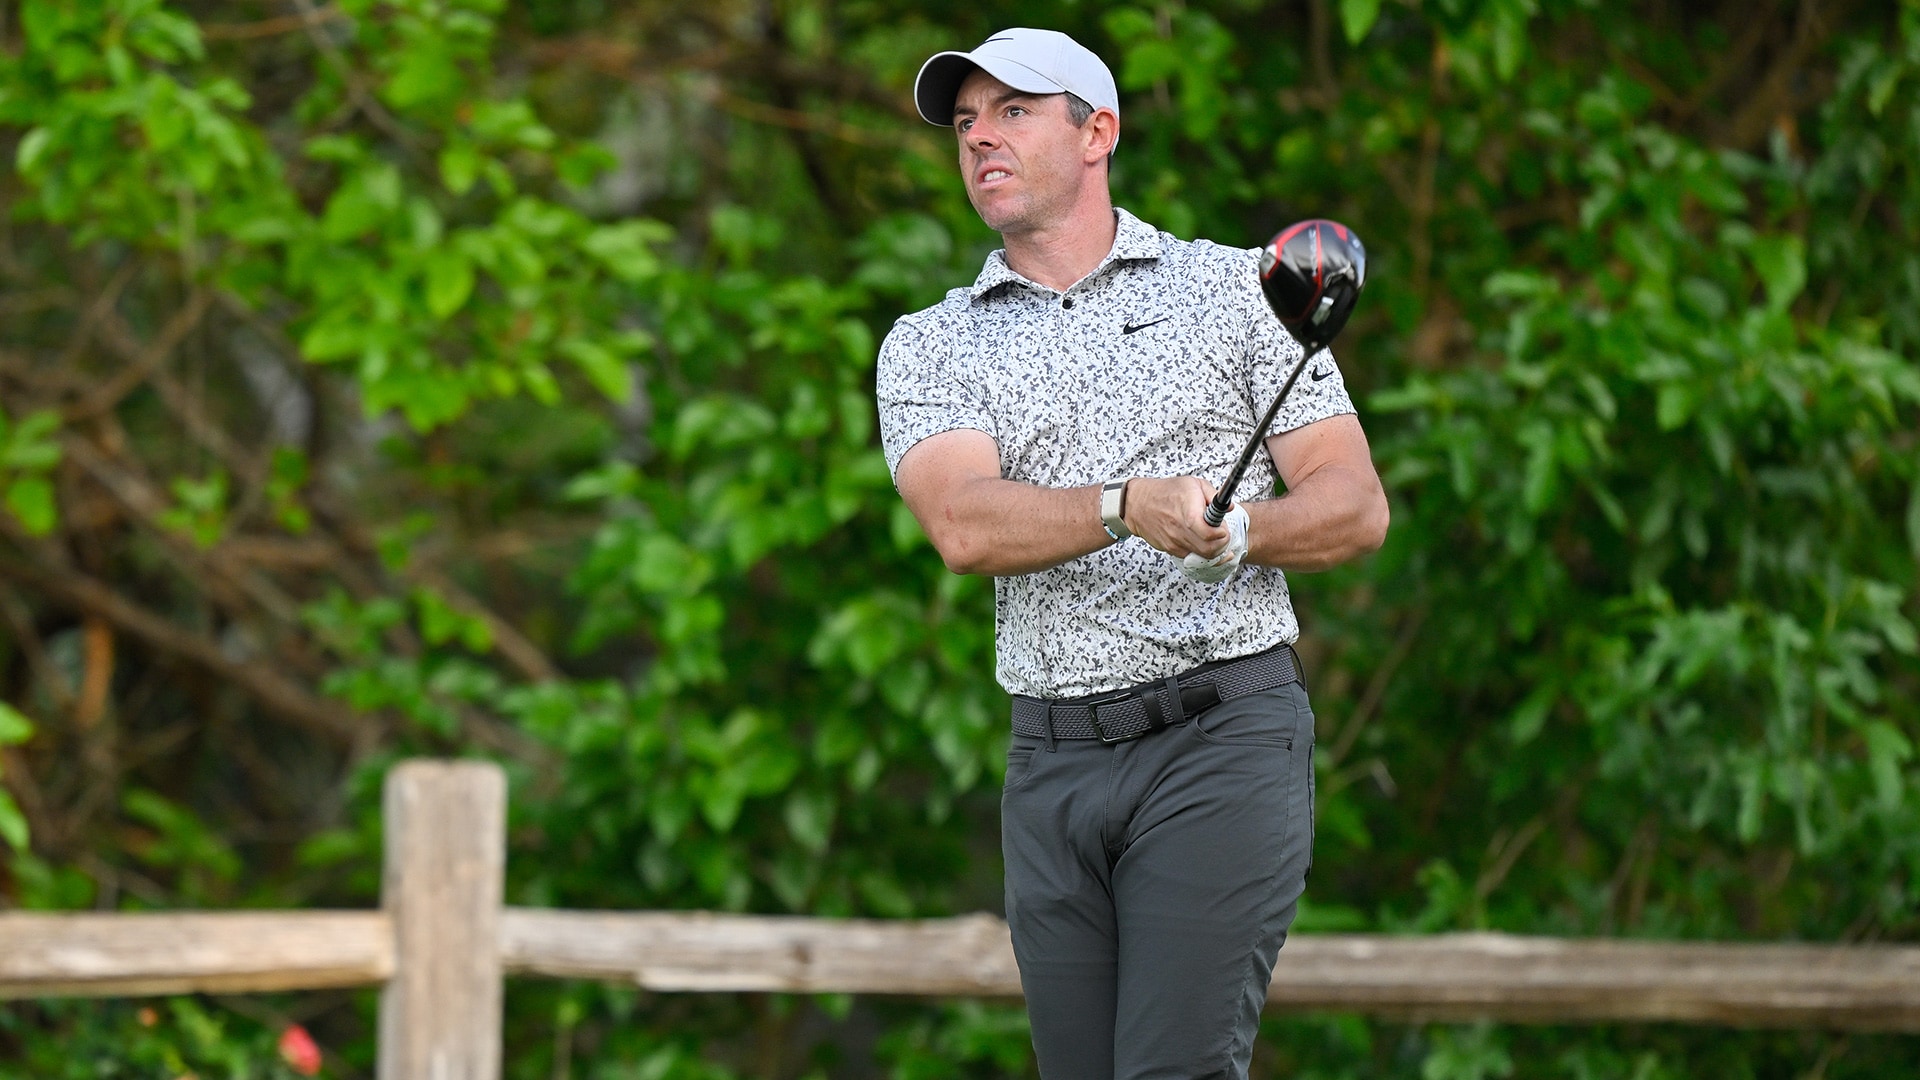 Rory McIlroy closes match with epic drive inside 4 feet on 375-yard 18th